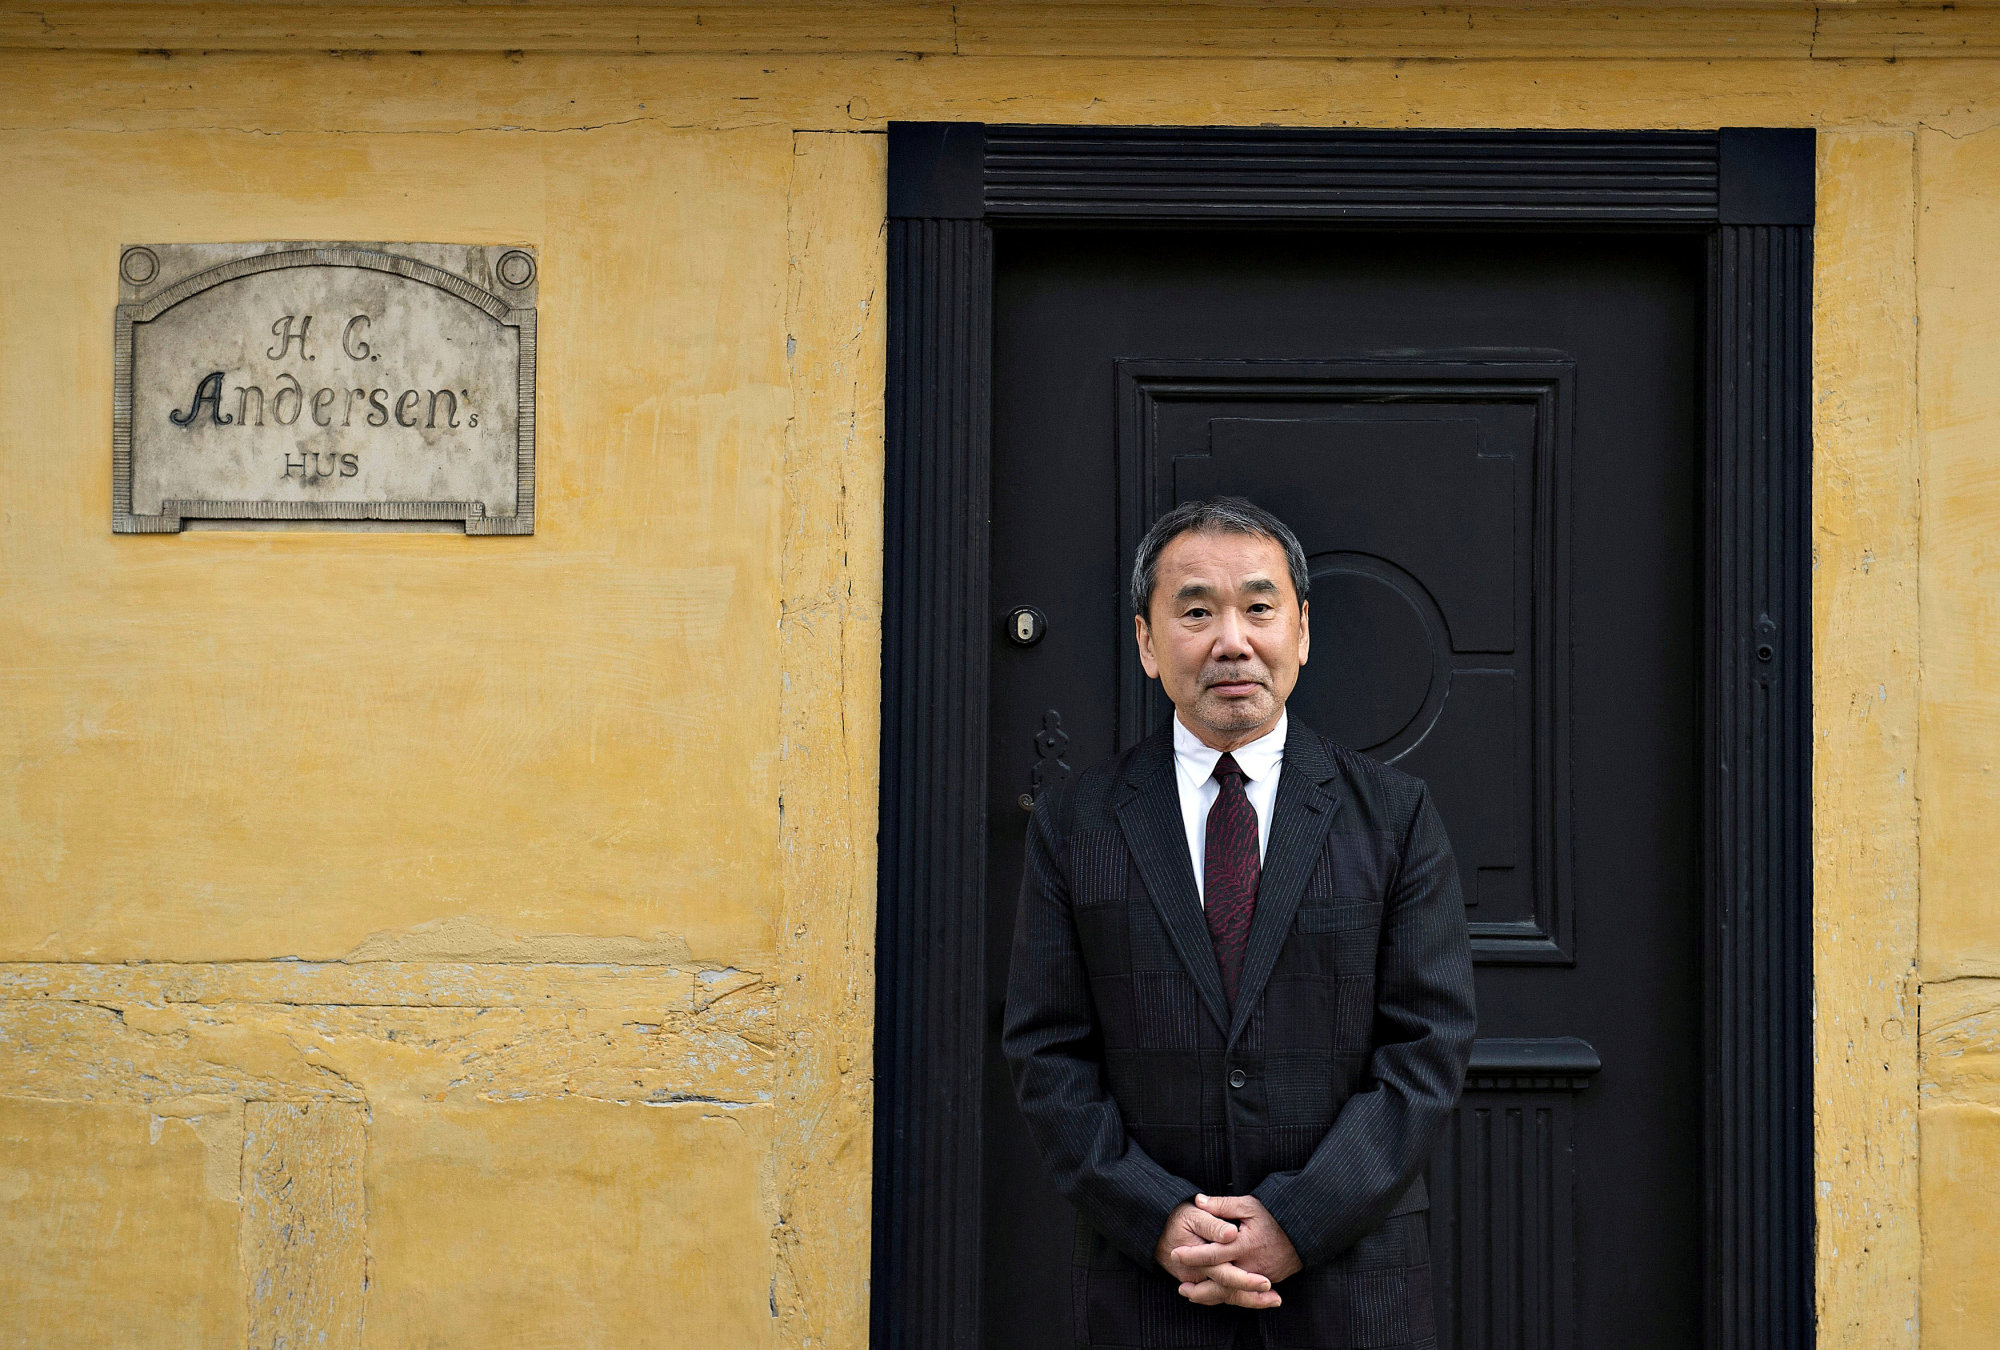 Japanese writer Haruki Murakami, laureate of Hans Christian Andersen Literature Award 2016, is seen outside H. C. Andersen's house in Odense, Denmark October 30, 2016. Scanpix Denmark/Henning Bagger/via REUTERS/File Photo ATTENTION EDITORS - THIS IMAGE WAS PROVIDED BY A THIRD PARTY. DENMARK OUT. NO COMMERCIAL OR EDITORIAL SALES IN DENMARK. NO COMMERCIAL SALES.